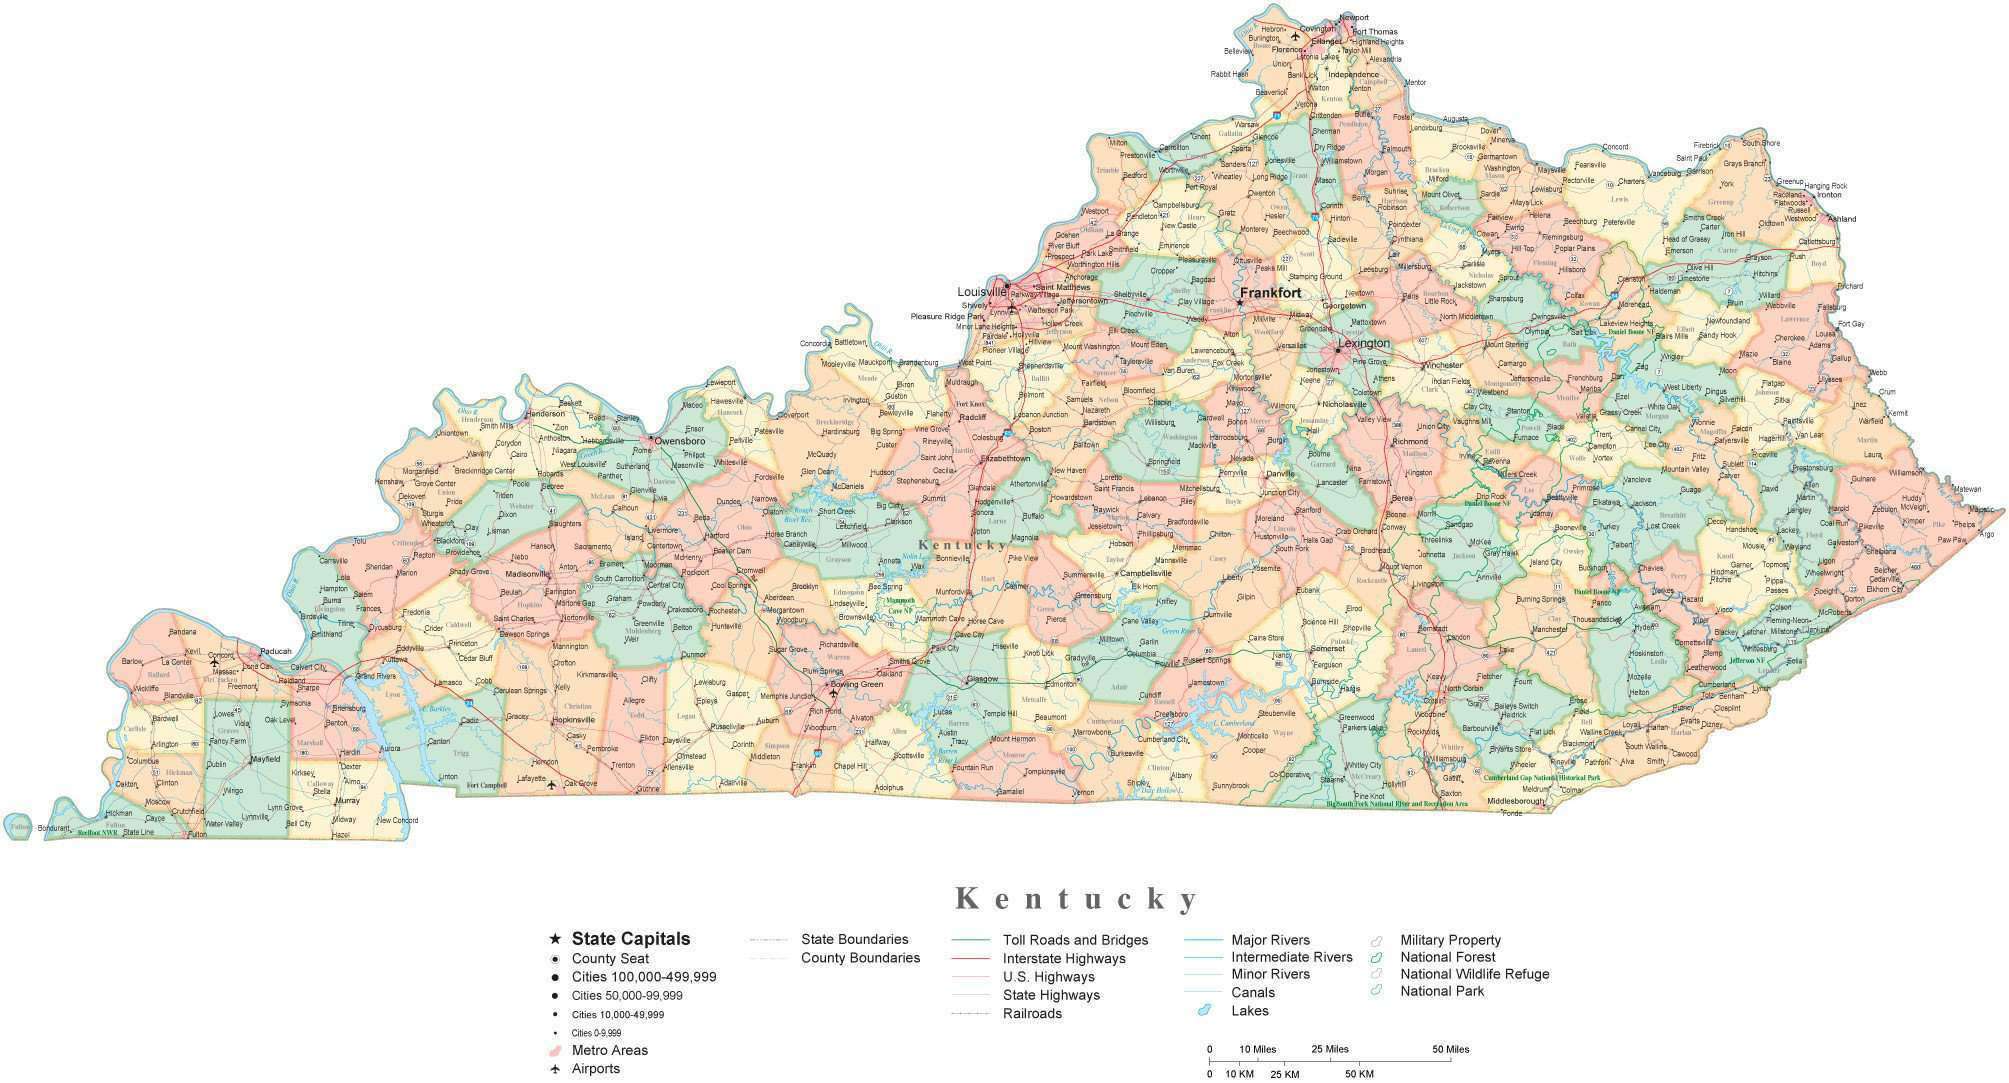 state-map-of-kentucky-in-adobe-illustrator-vector-format-detailed-editable-map-from-map-resources